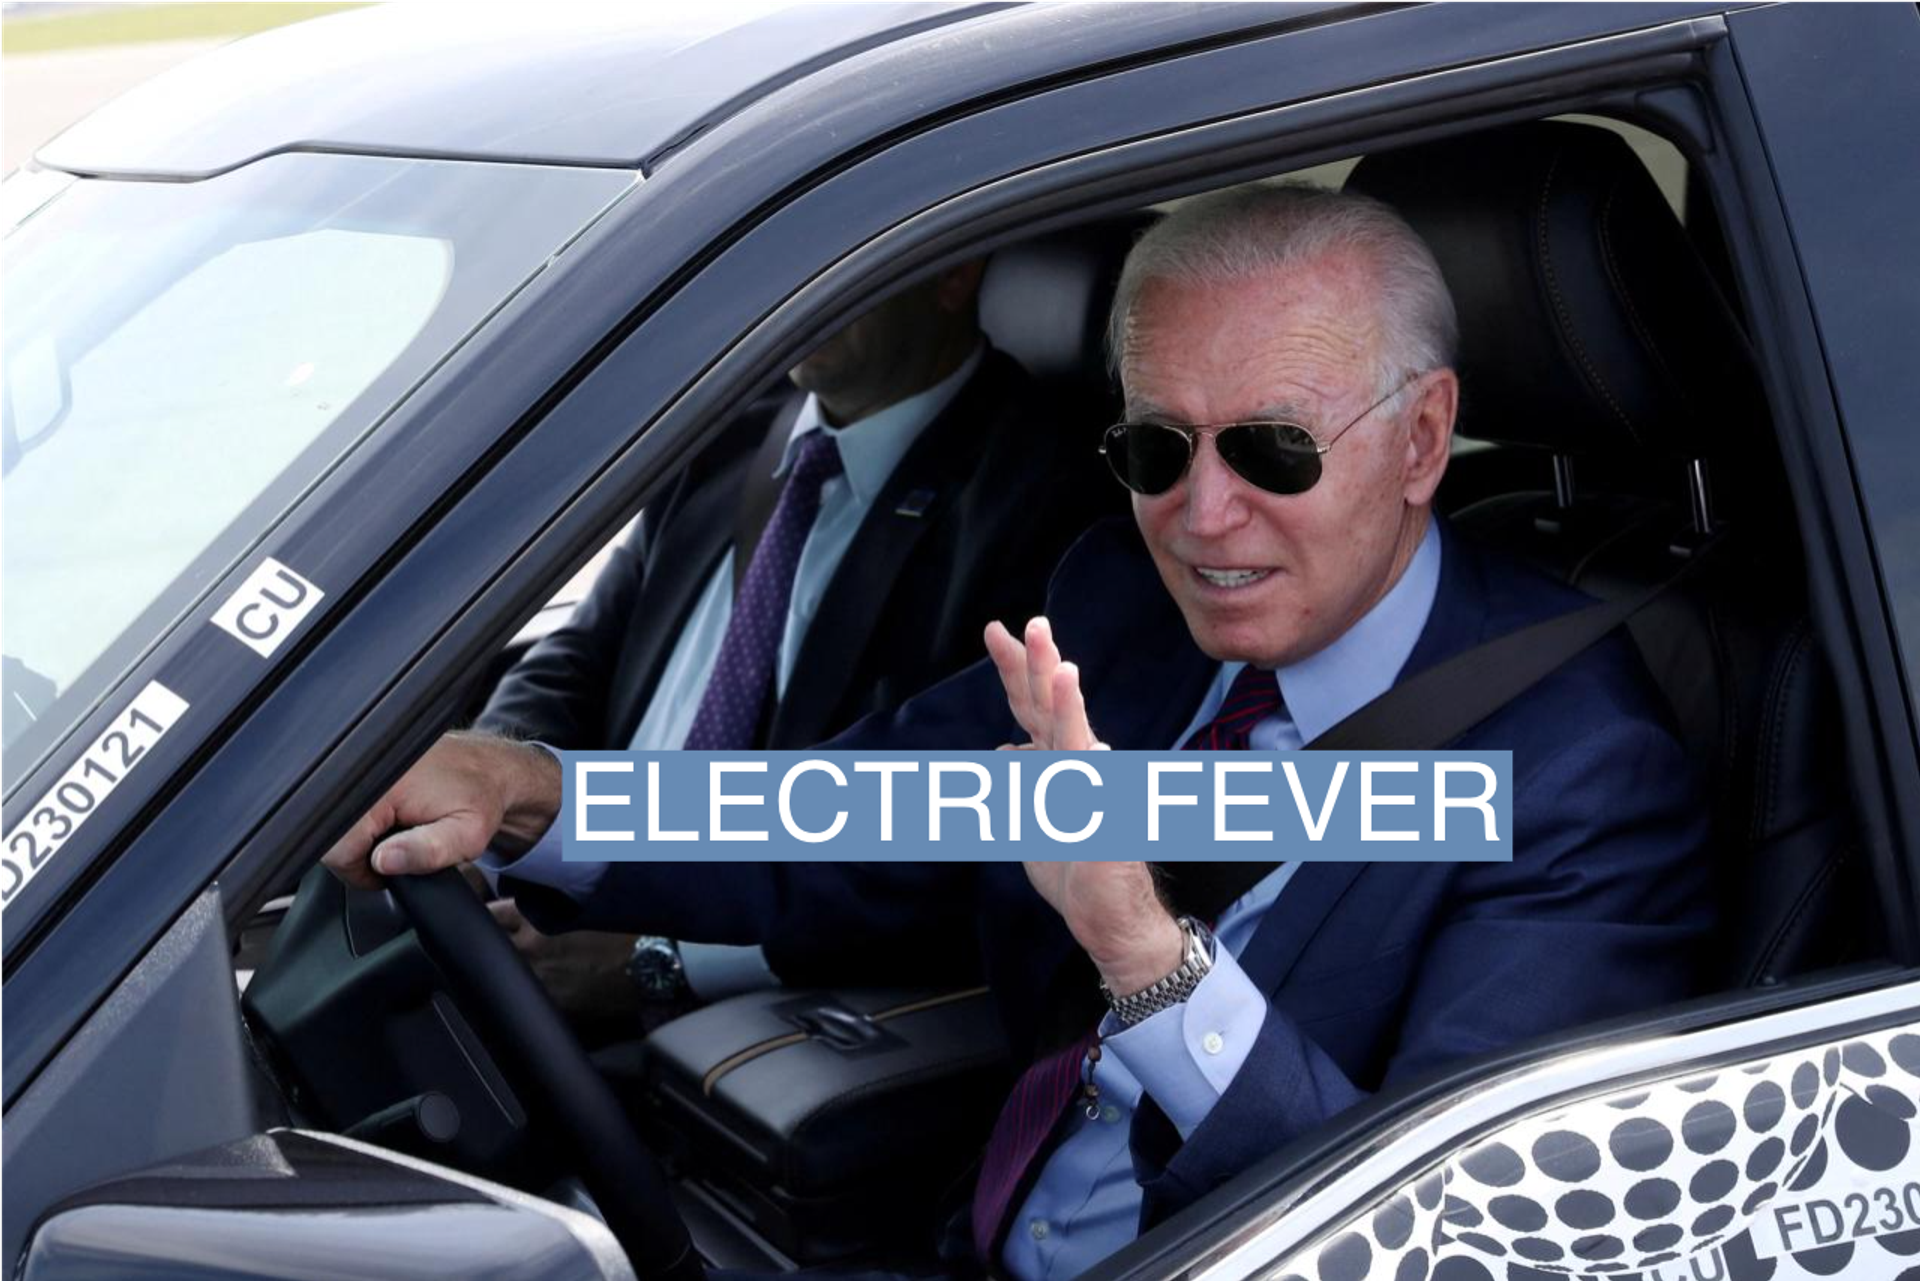  U.S. President Joe Biden waves as he tests the new Ford F-150 lightning truck as he visits VDAB at Ford Dearborn Development Center in Dearborn, Michigan, on May 18, 2021